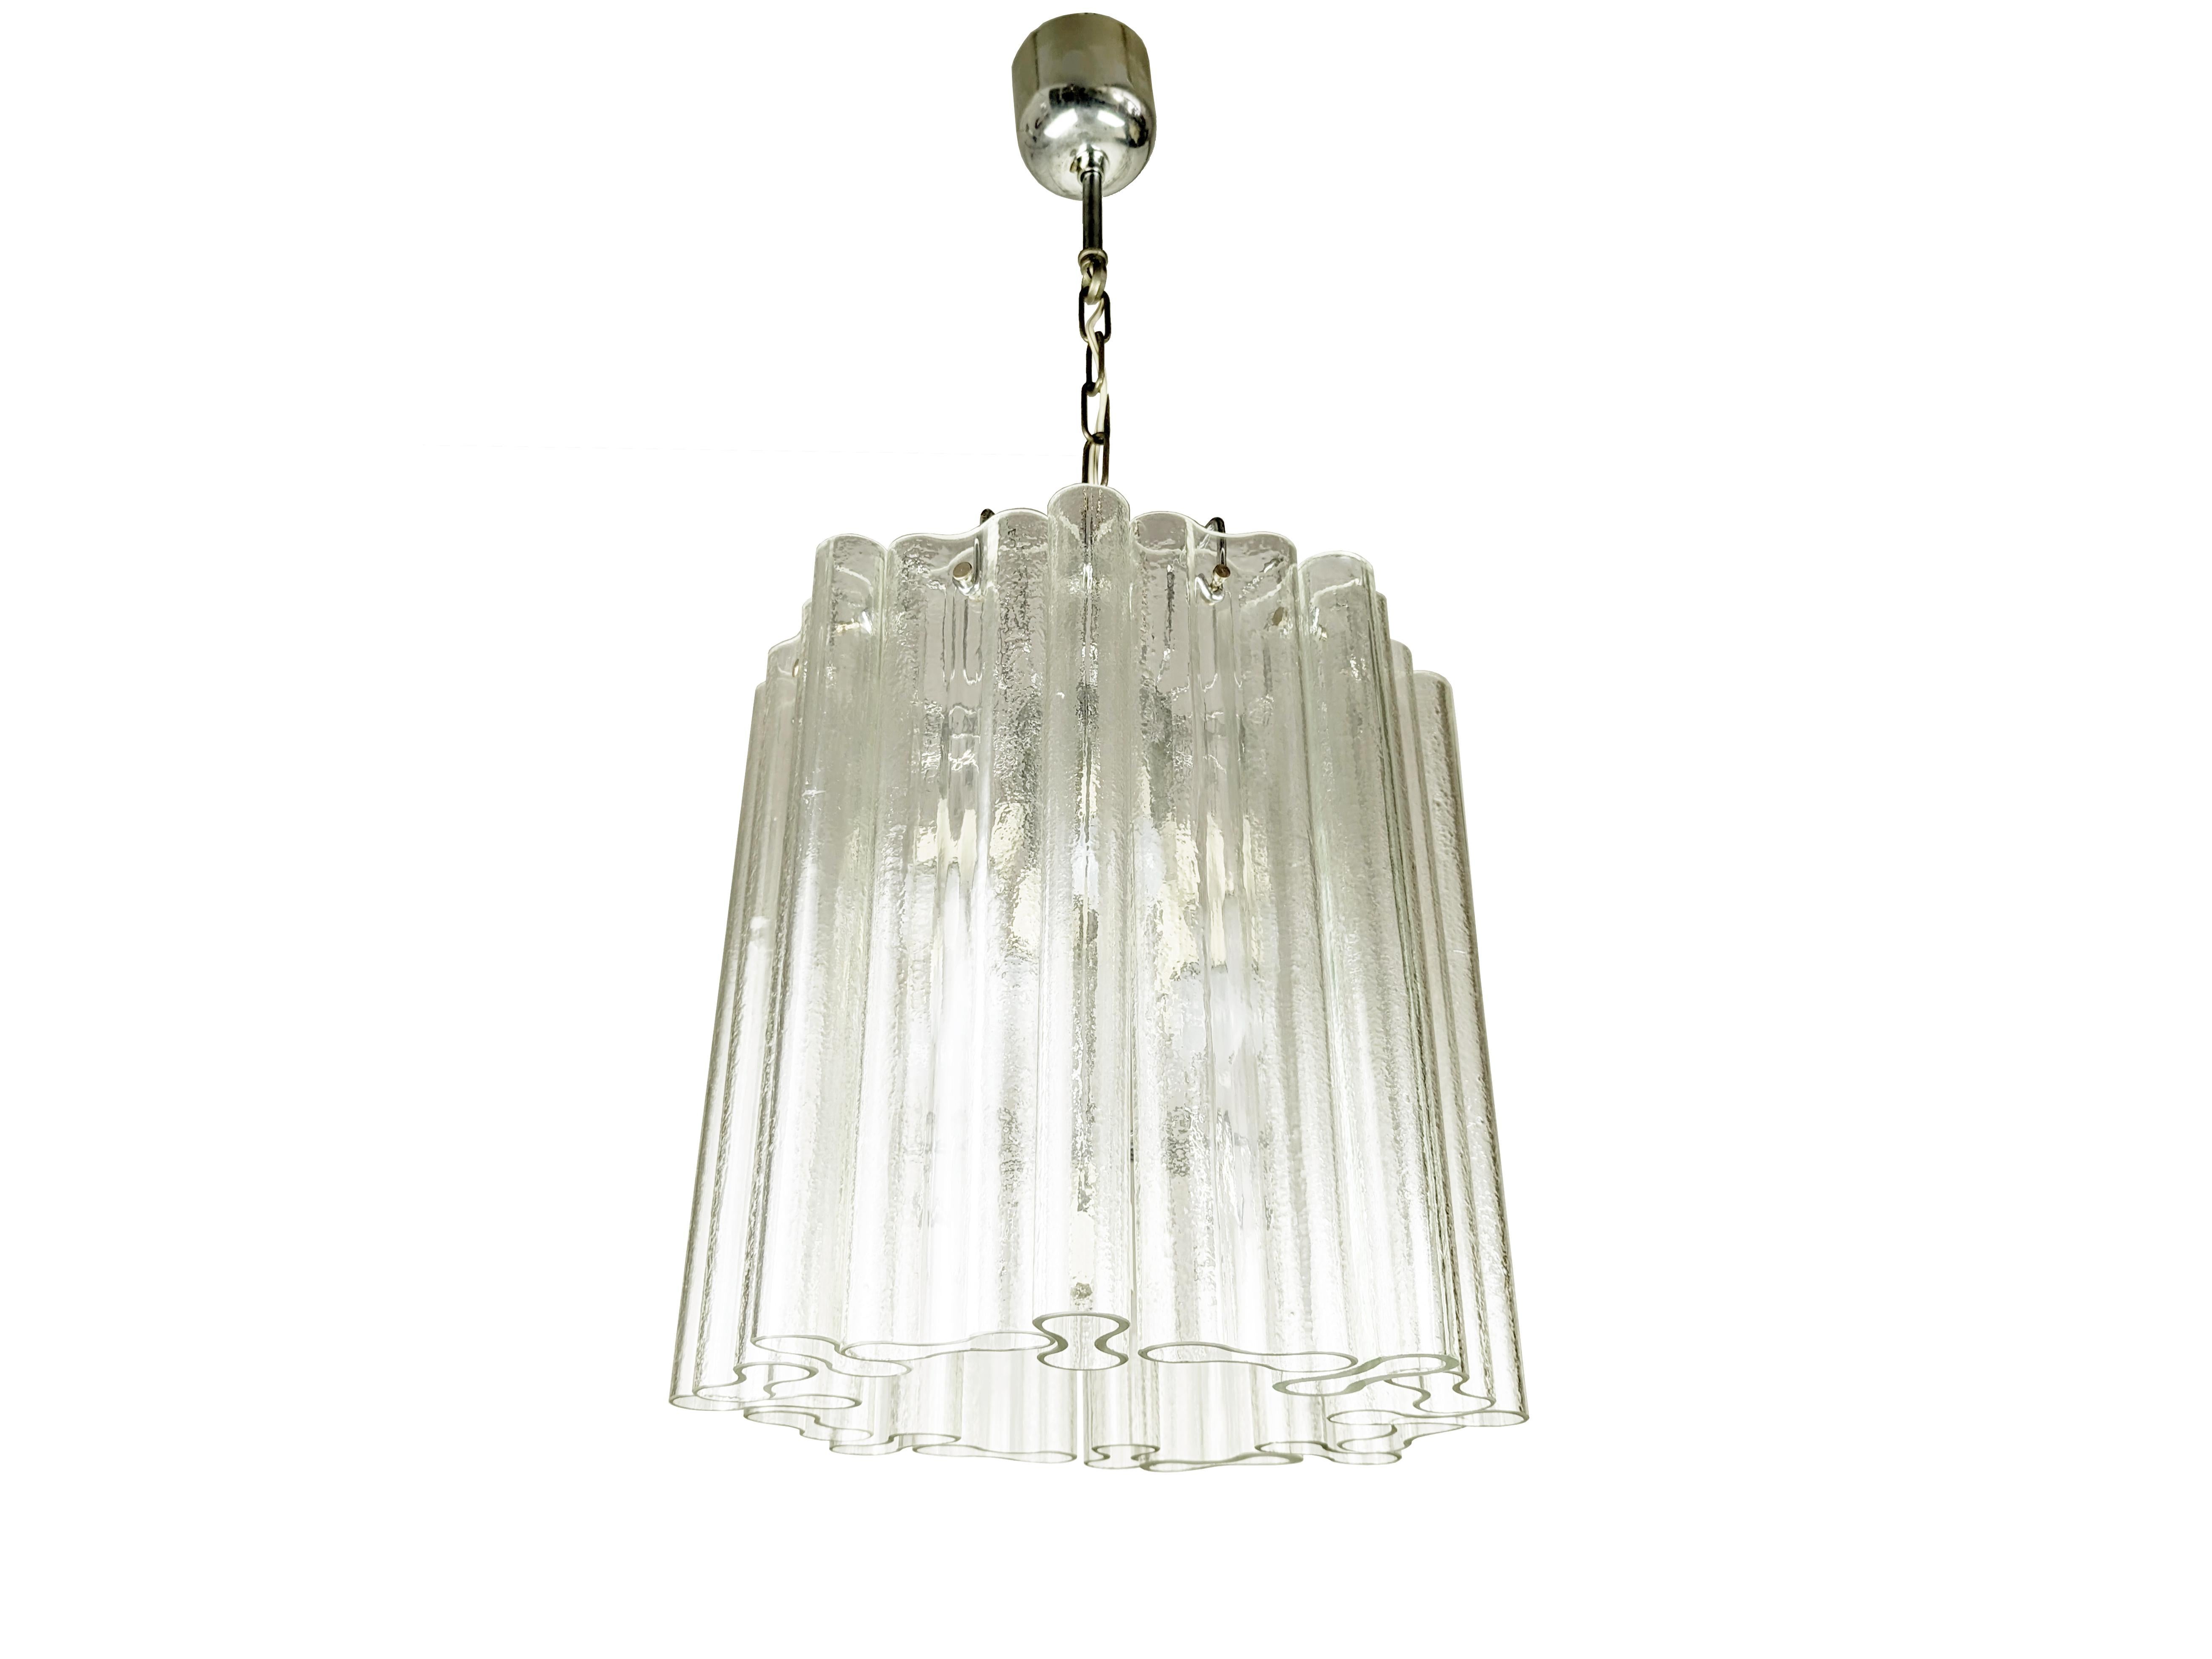 Murano pendant lamp made of chrome plated metal structure with 16 clear molded glass 